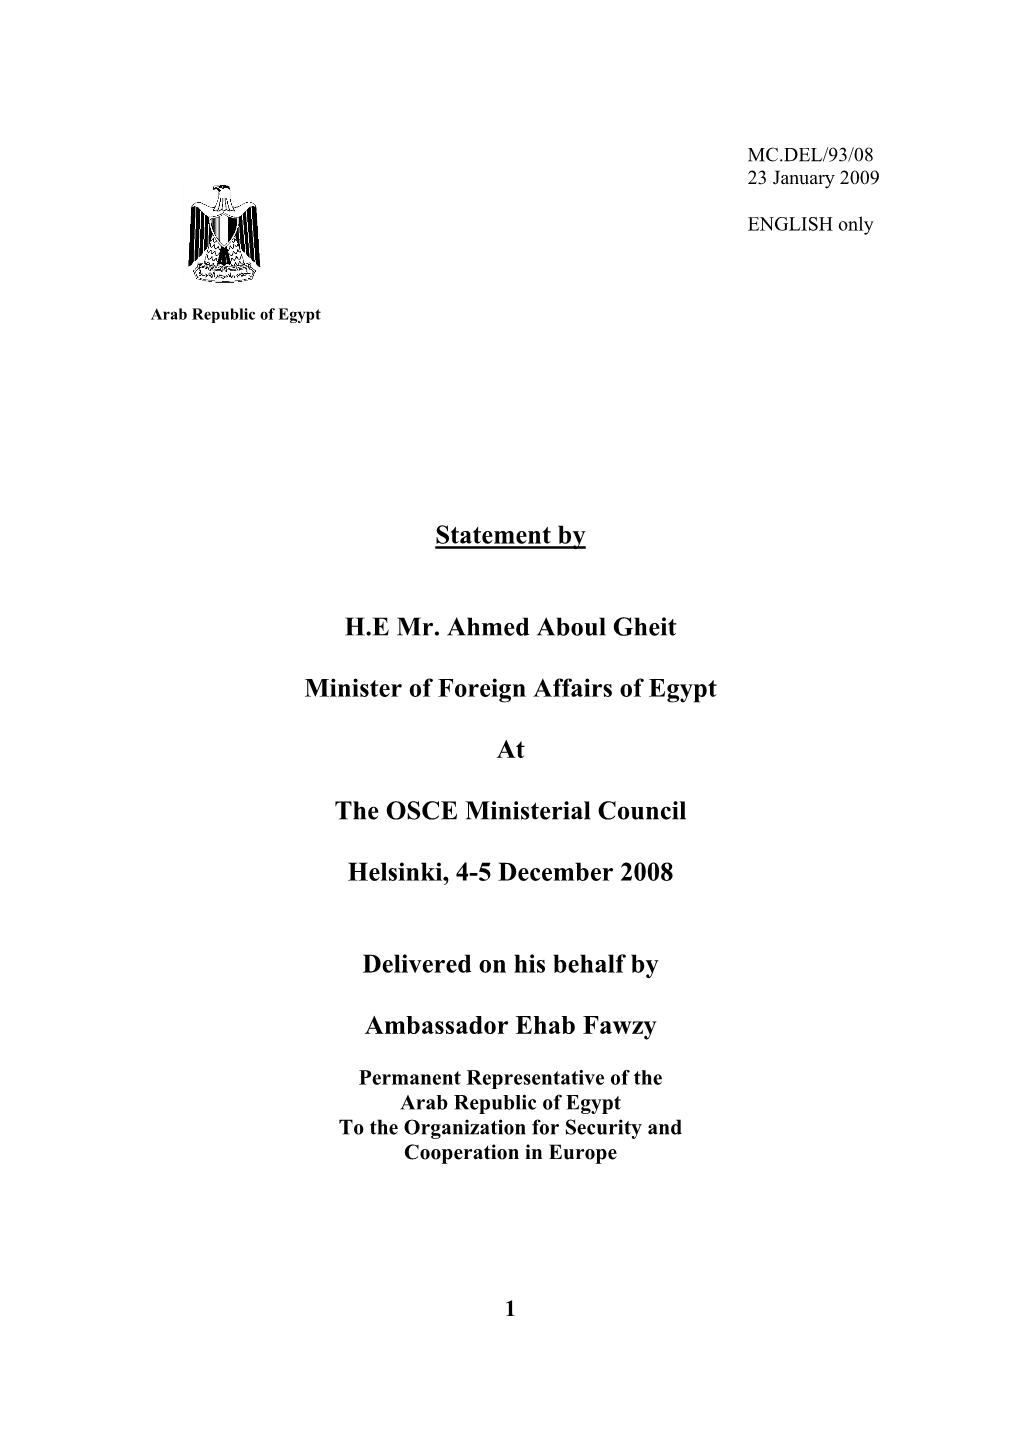 Statement by H.E Mr. Ahmed Aboul Gheit Minister of Foreign Affairs Of